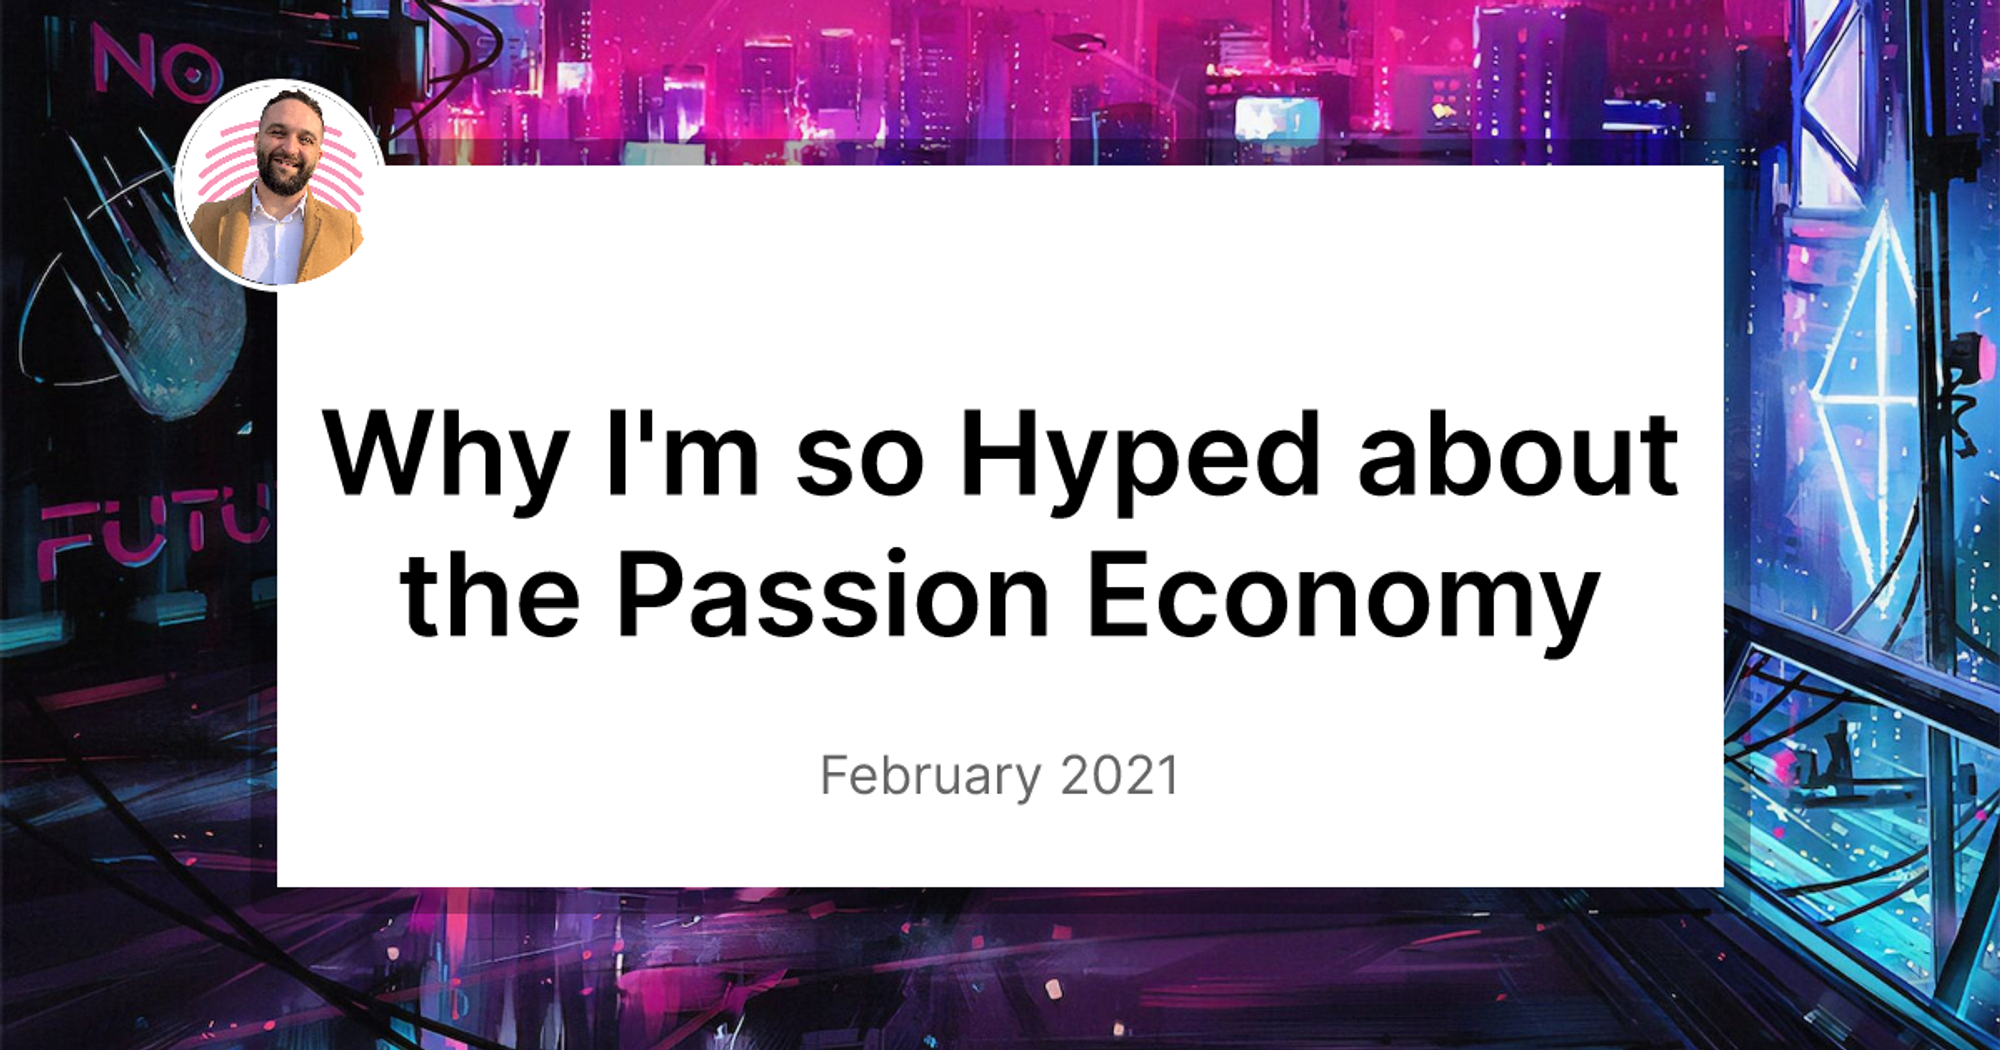 Why I'm so Hyped about the Passion Economy